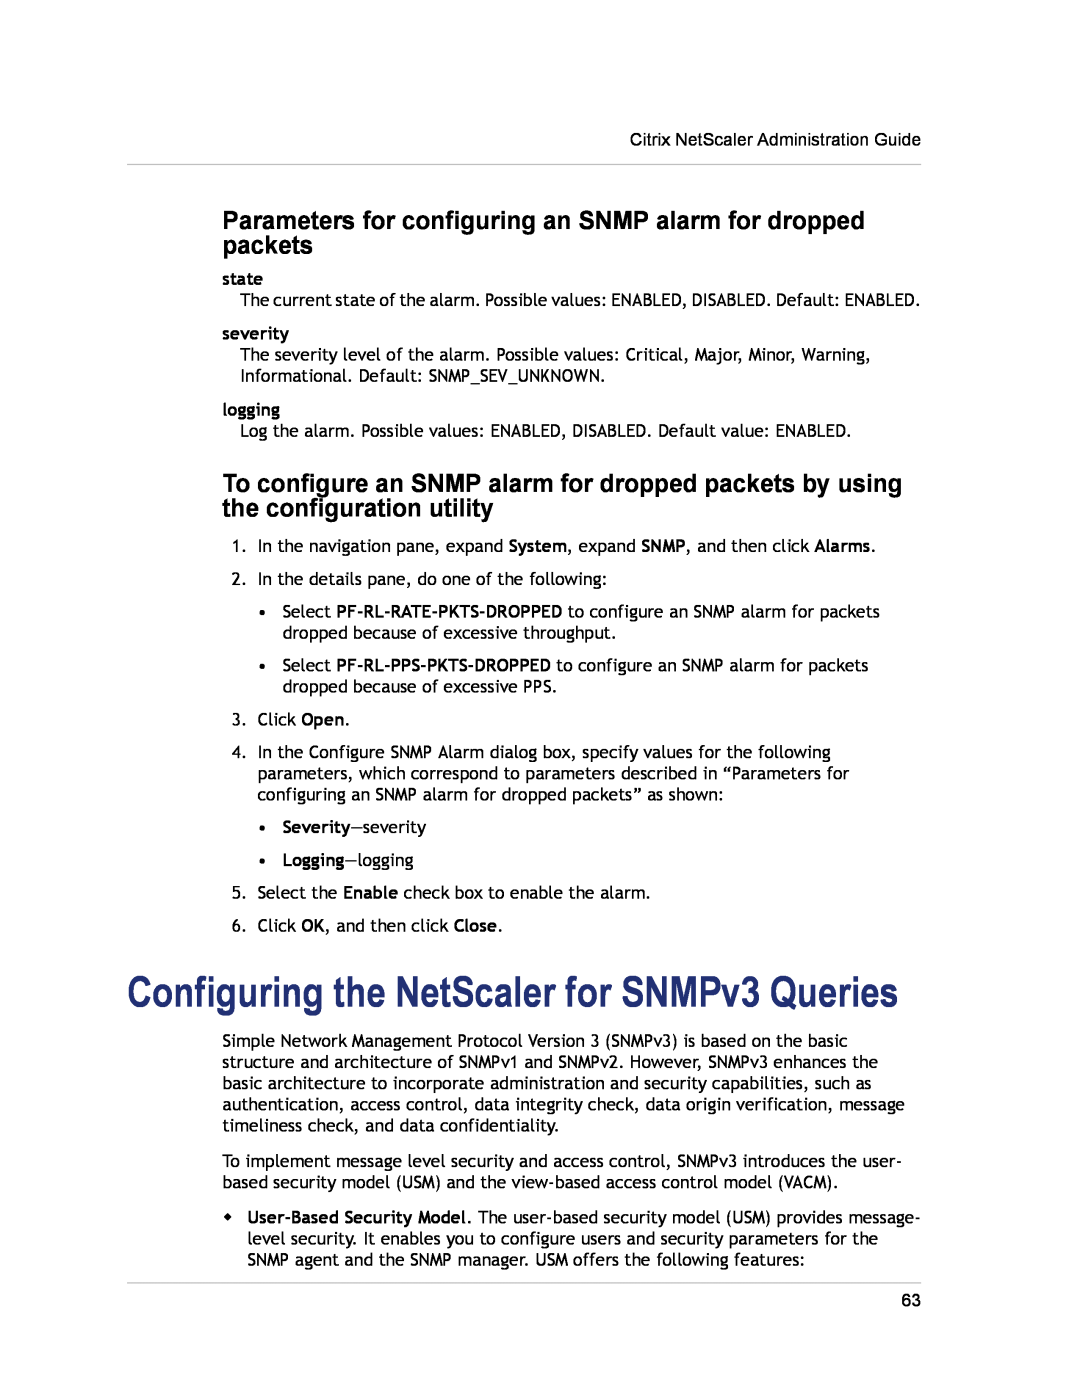 Citrix Systems CITRIX NETSCALER 9.3 manual Configuring the NetScaler for SNMPv3 Queries, state, severity, logging 